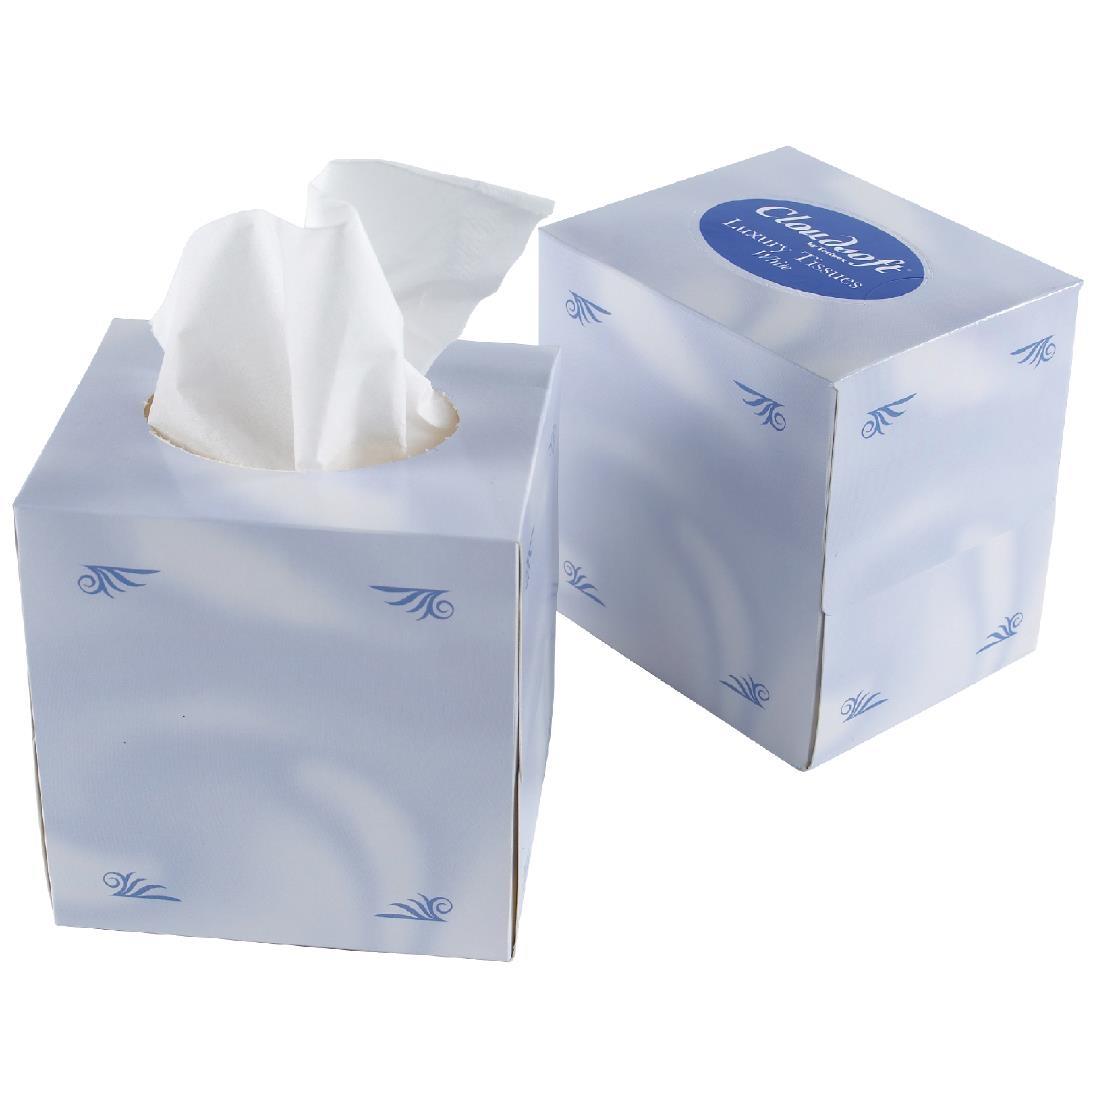 Facial Tissues Cube (Pack of 24) - CF204  - 1